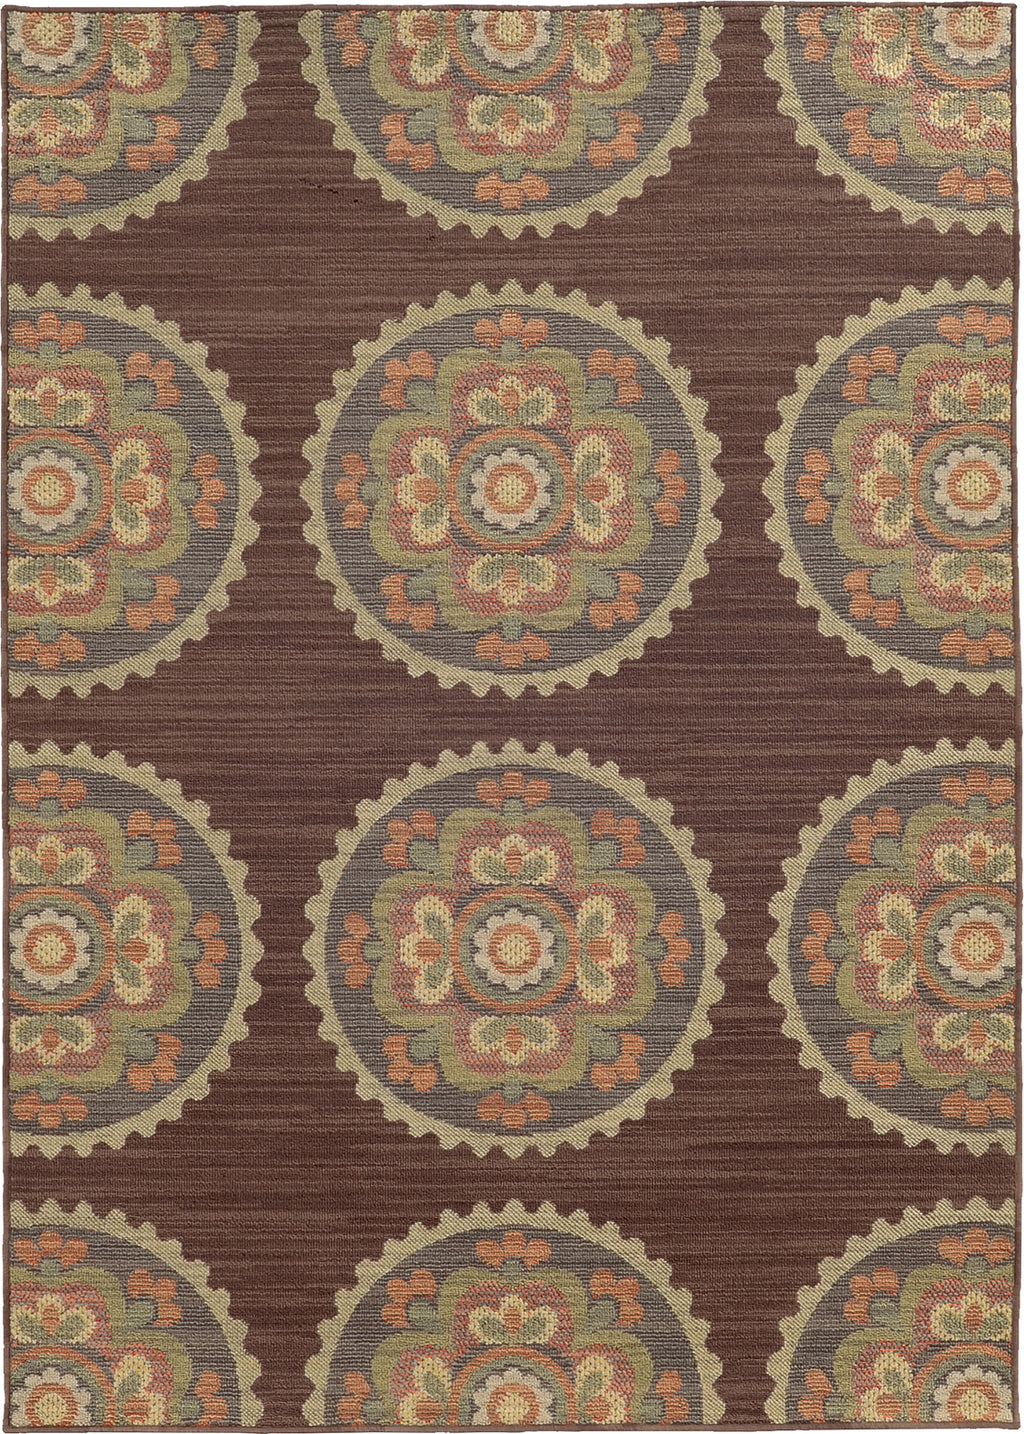 Tommy Bahama Cabana 501M2 Brown Area Rug Main Feature